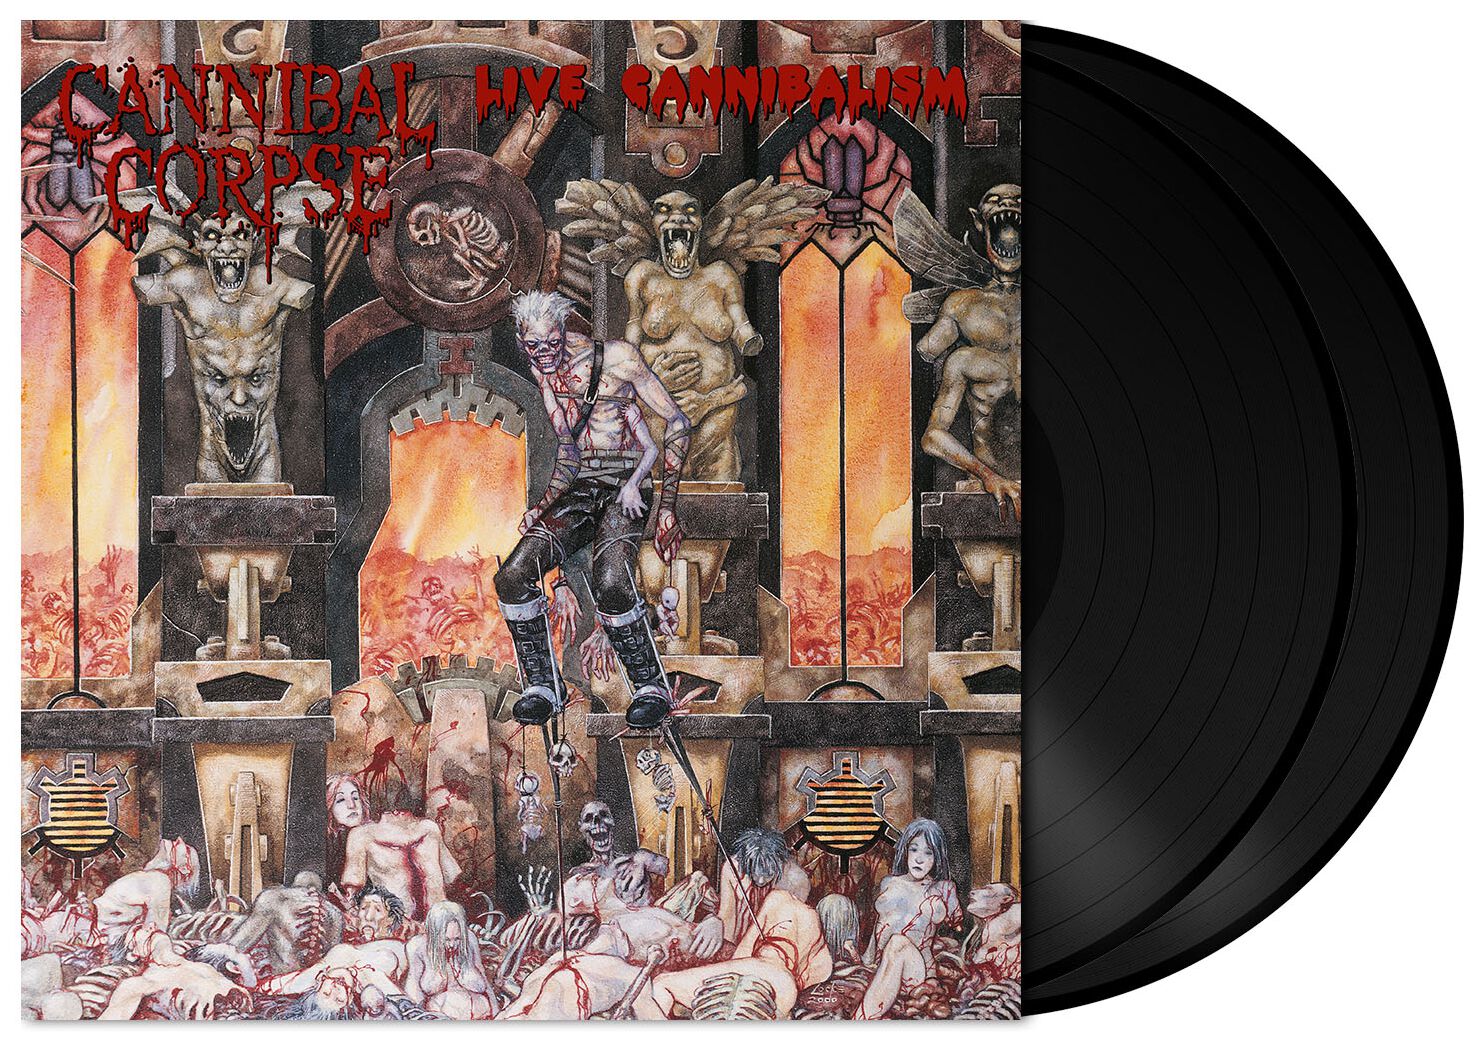 Cannibal Corpse Live Cannibalism LP multicolor